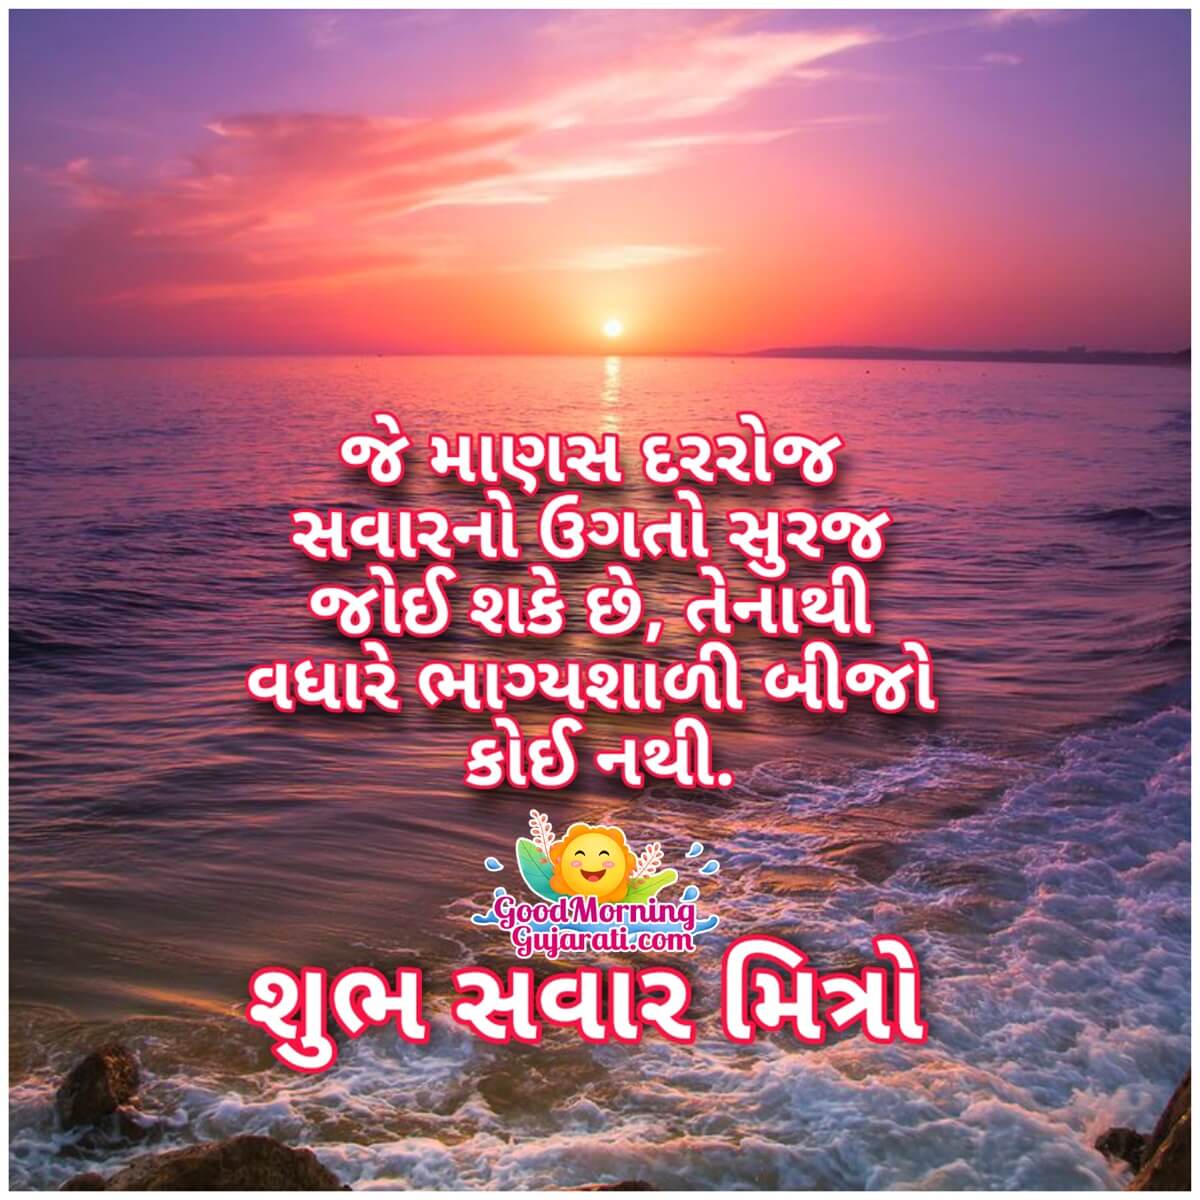 Good Morning Messages To Friends In Gujarati